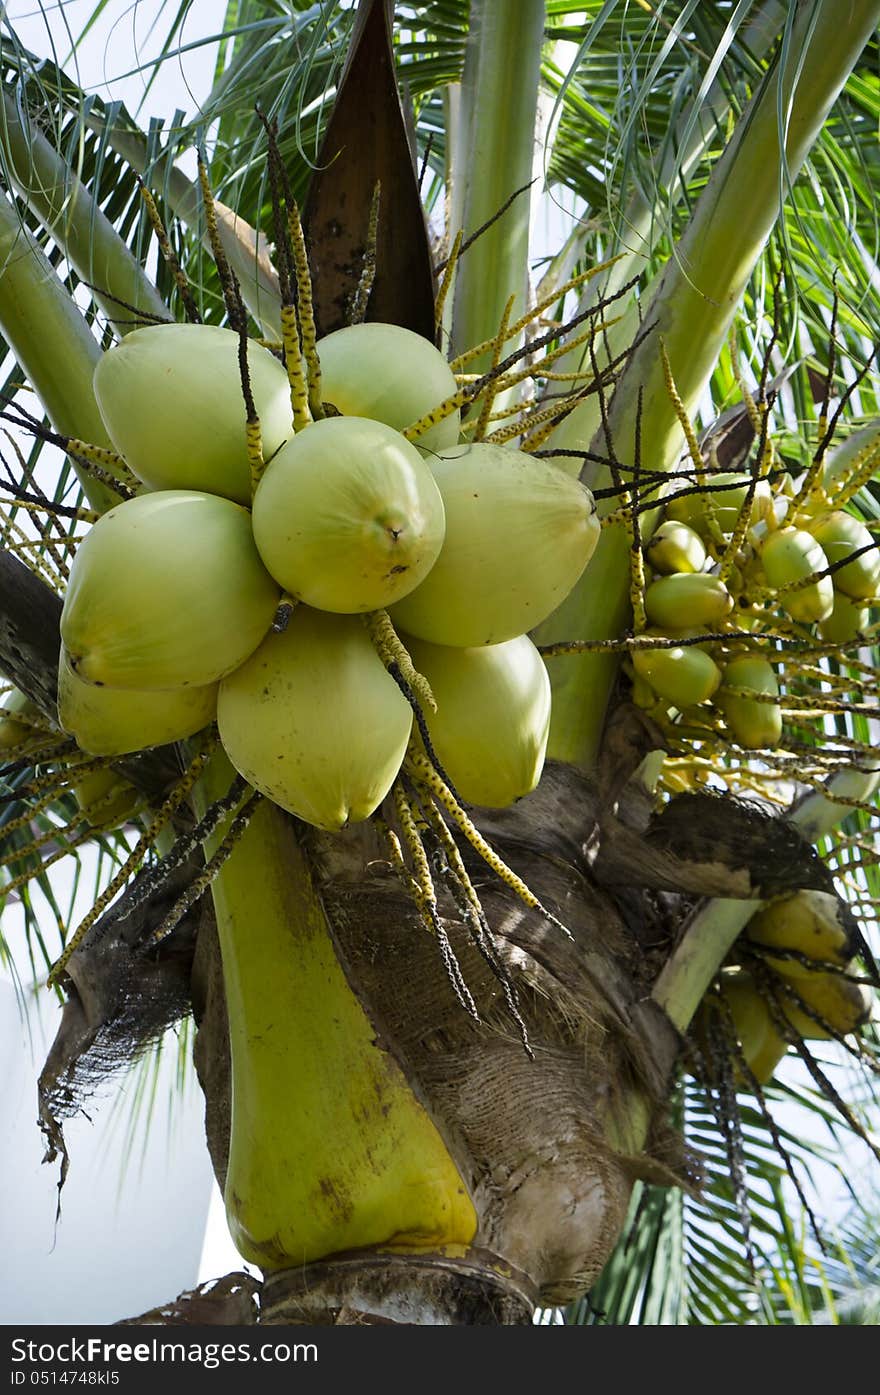 Close view of coconut fruits found in tropical areas